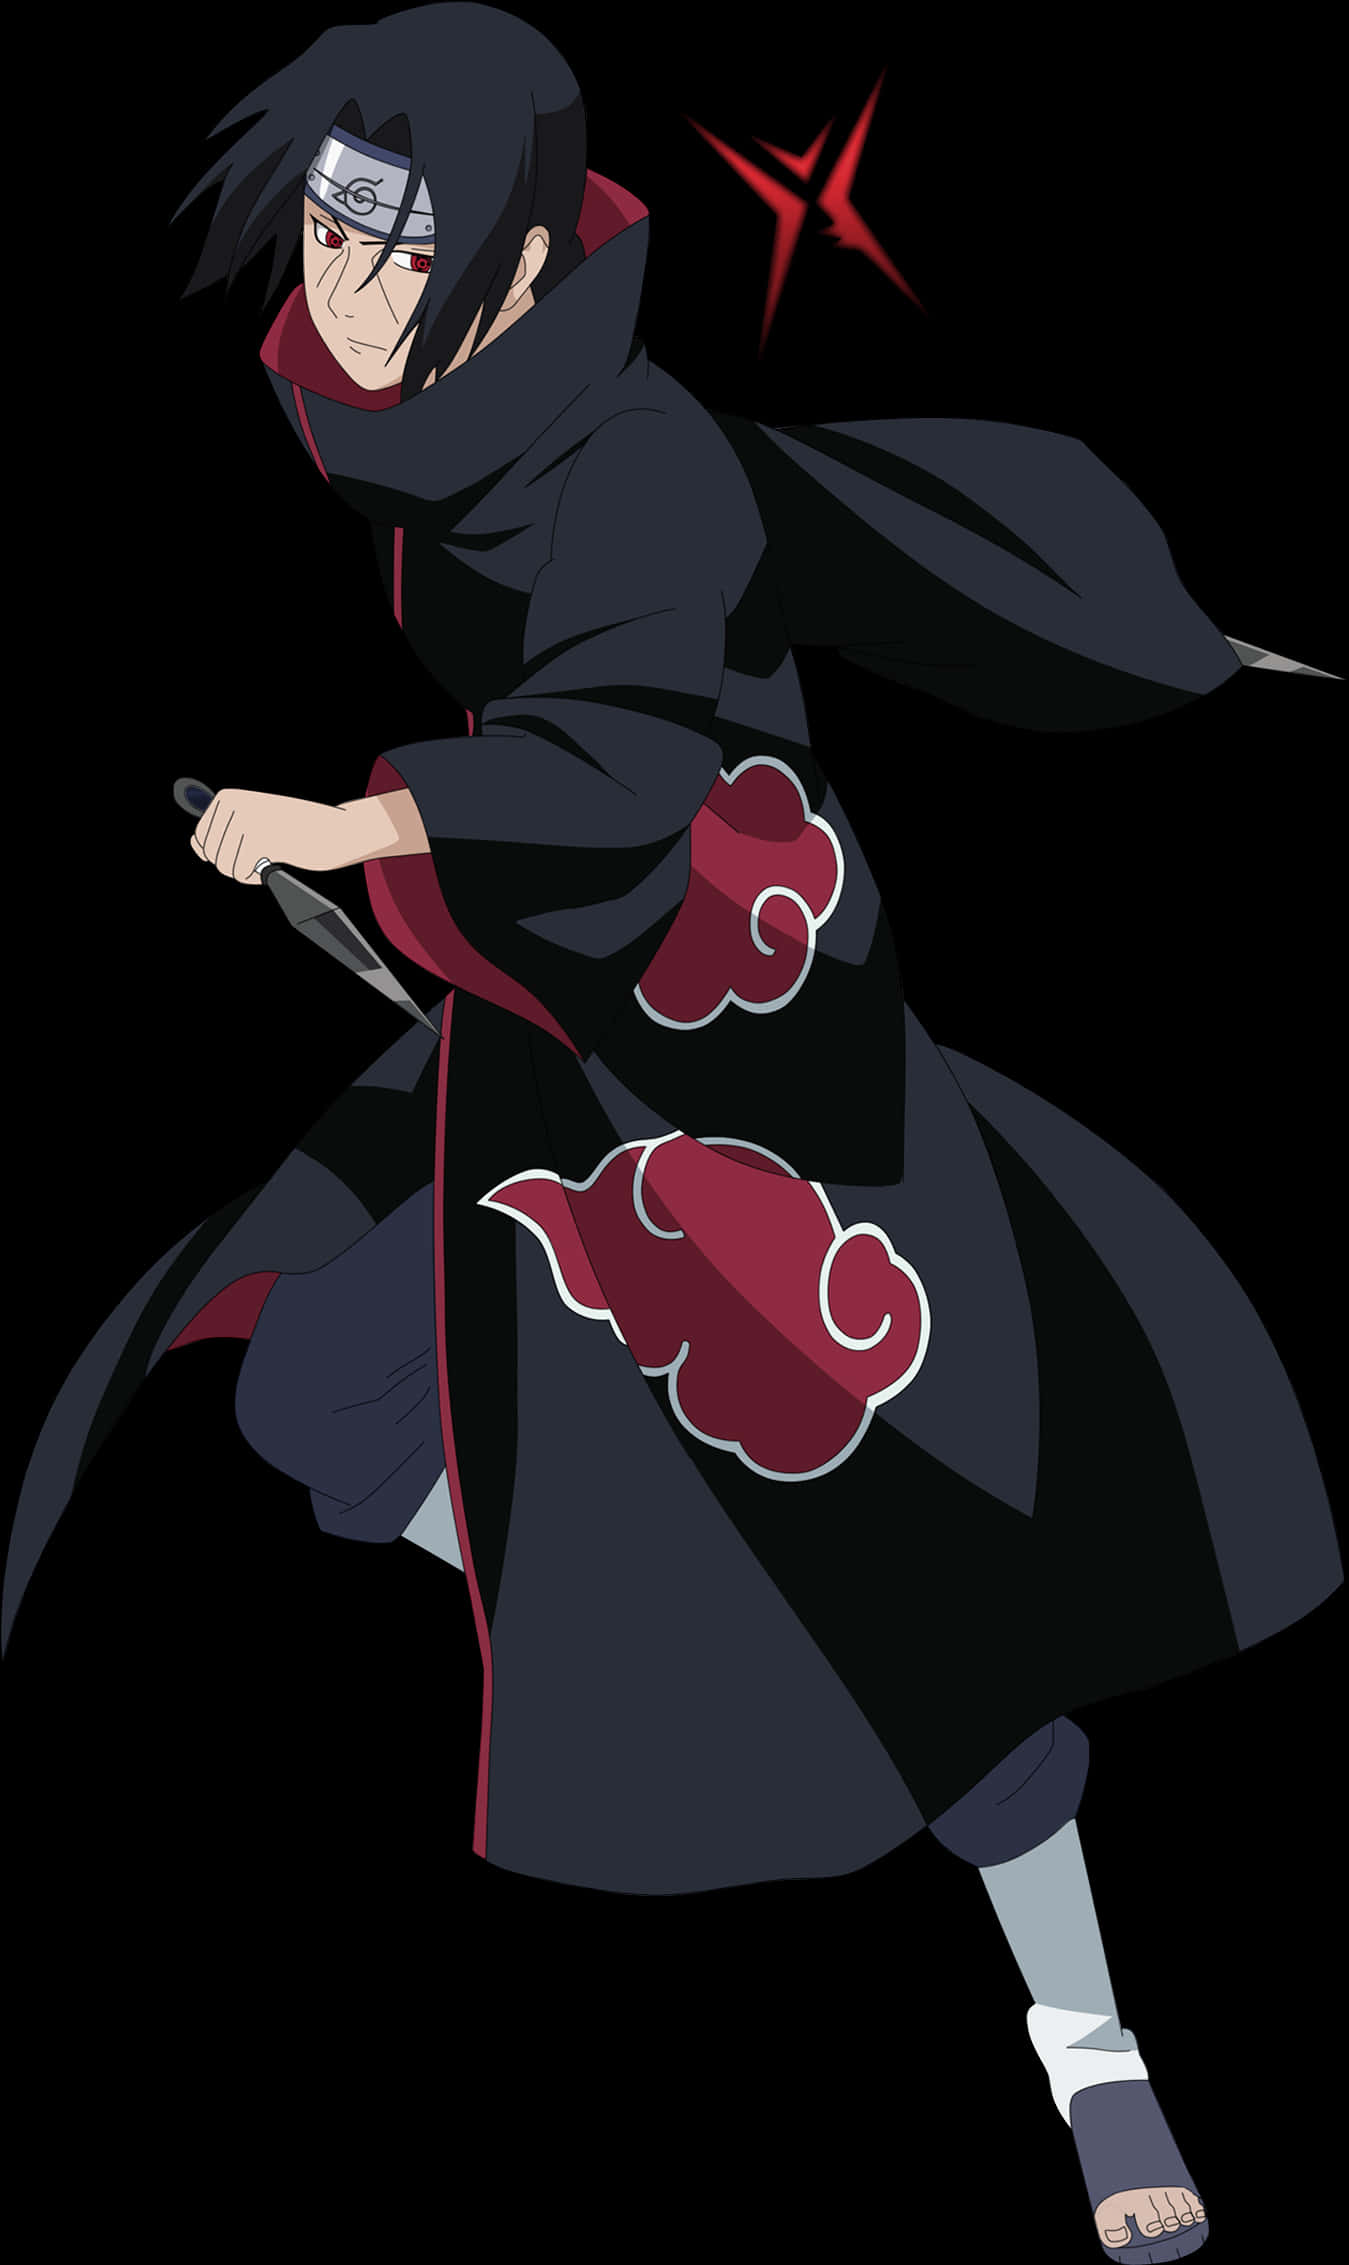 A Cartoon Of A Person In A Black Robe